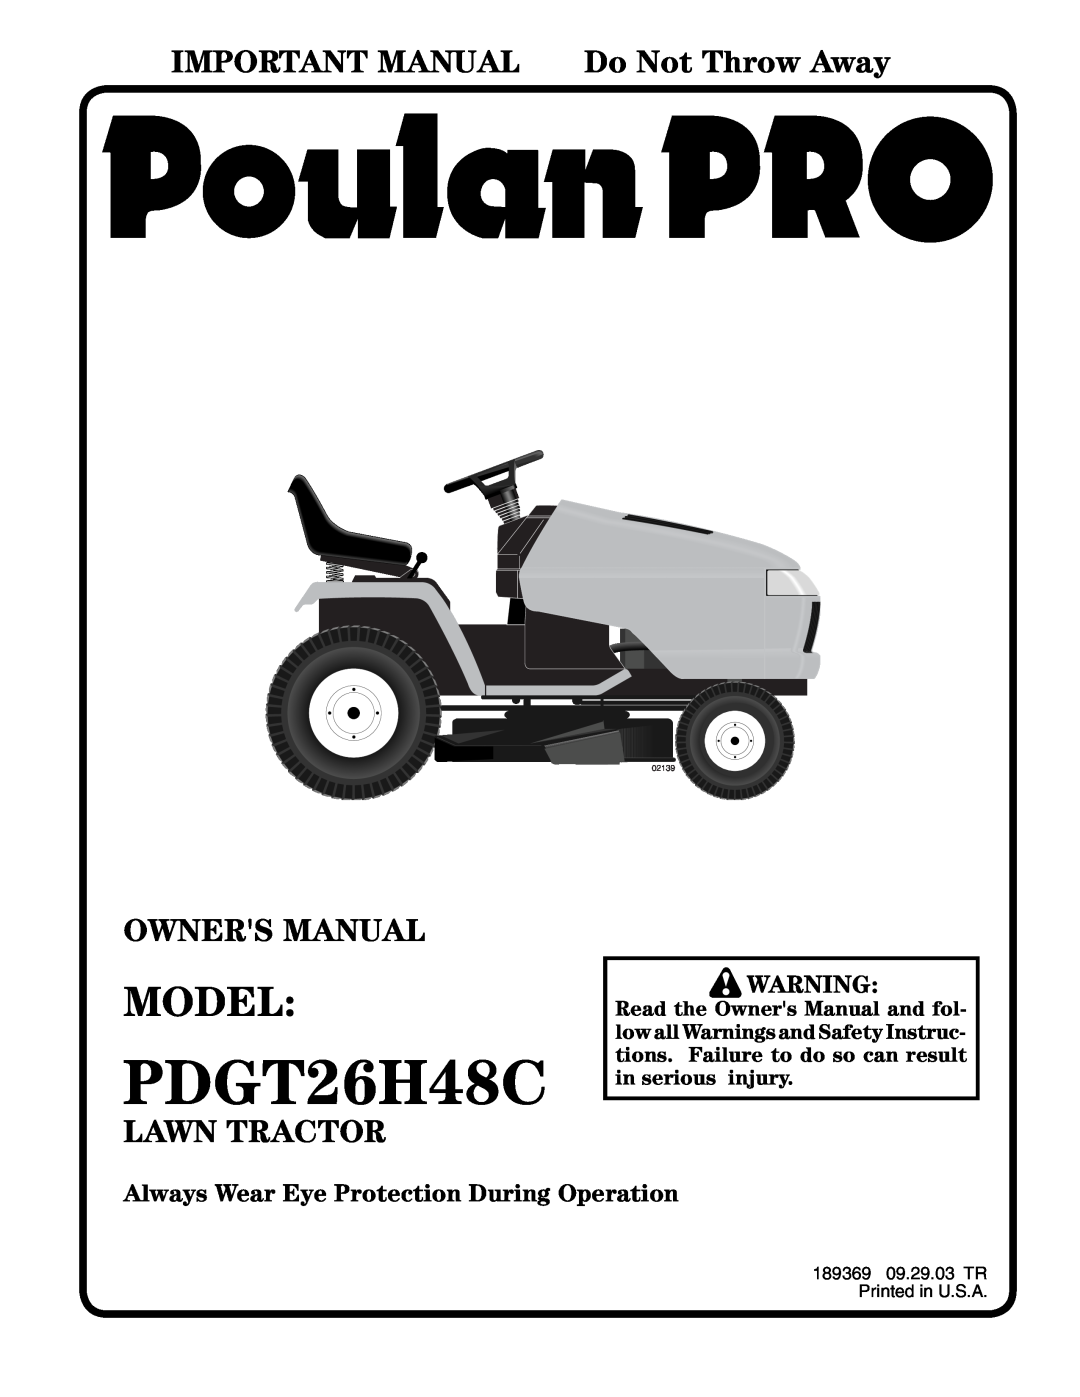 Poulan PDGT26H48C owner manual Model, IMPORTANT MANUAL Do Not Throw Away, Lawn Tractor, 02139 